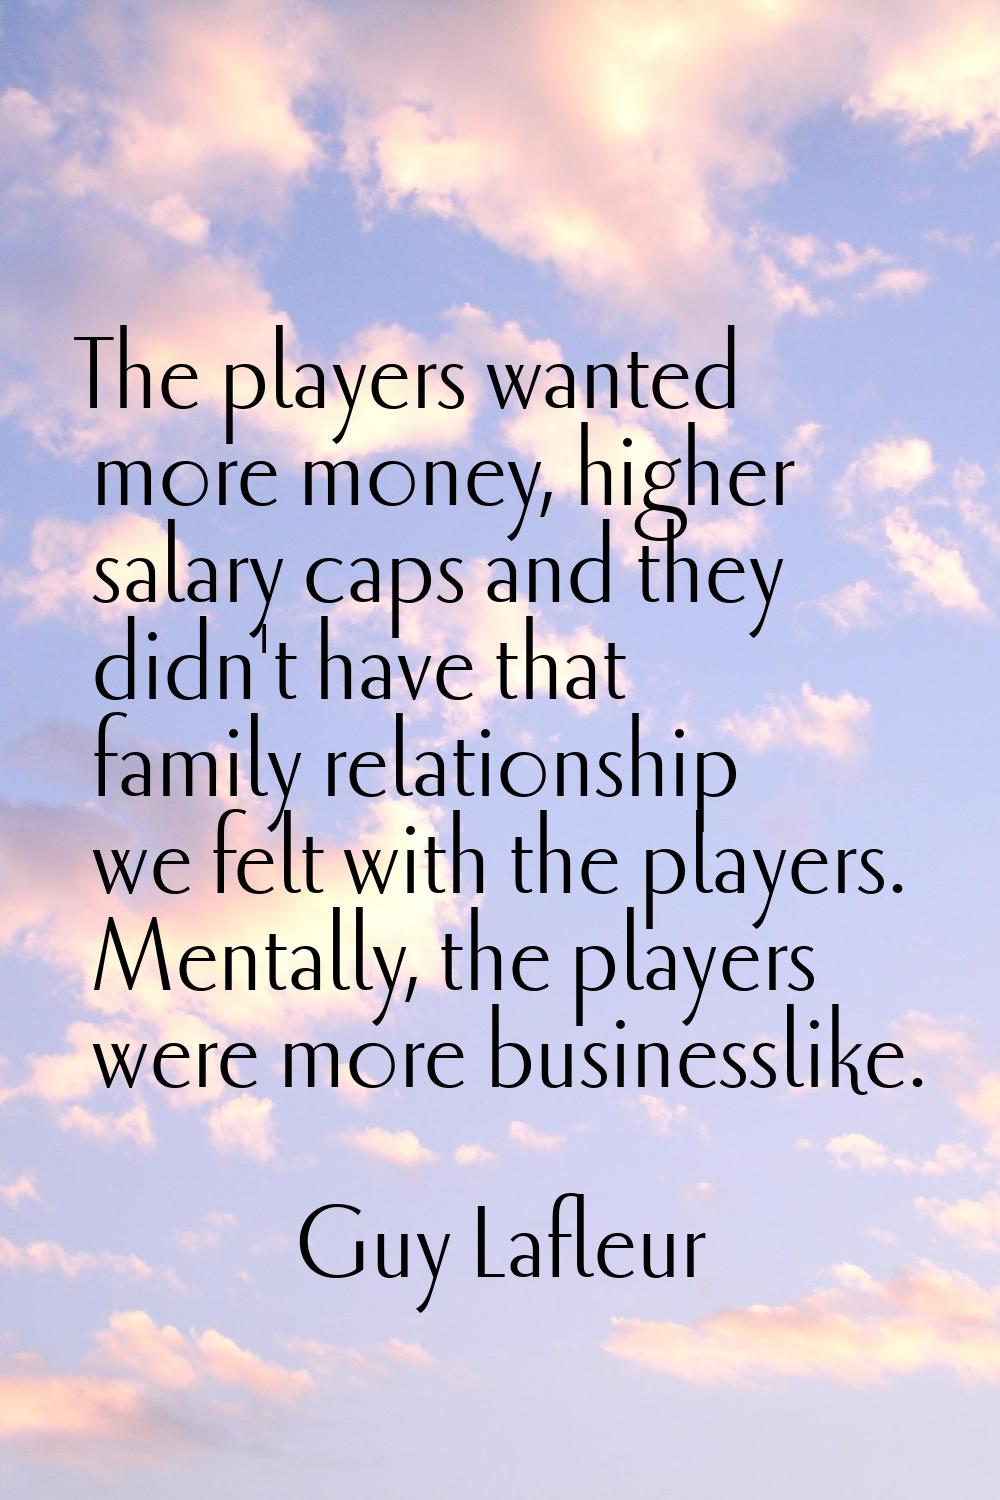 The players wanted more money, higher salary caps and they didn't have that family relationship we 